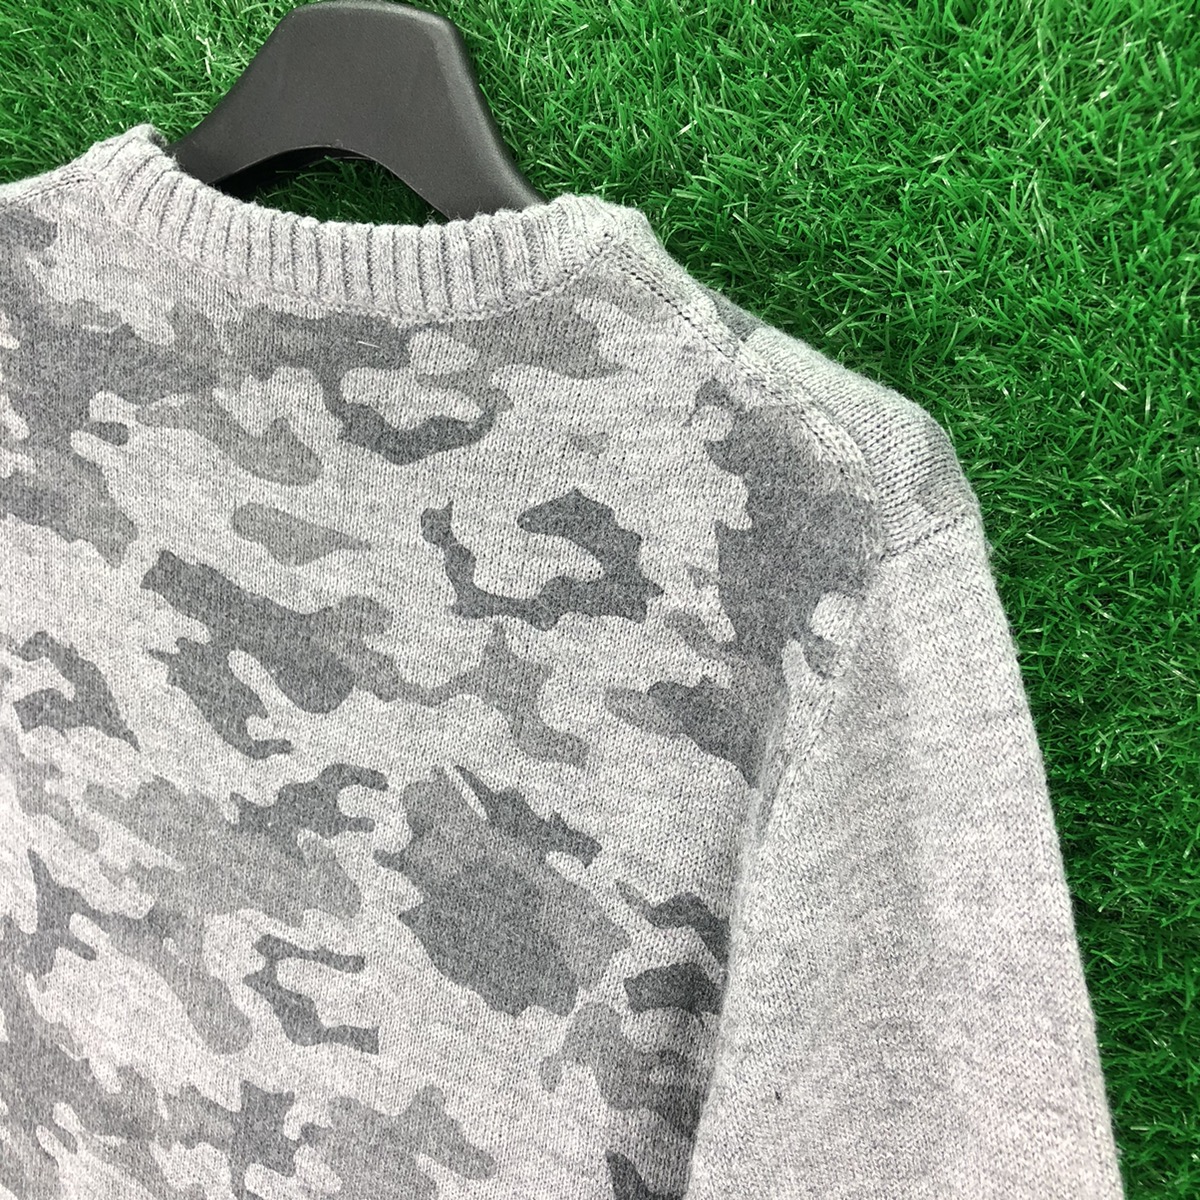 Japanese Brand - Abahouse Camo Knit Sweater - 5